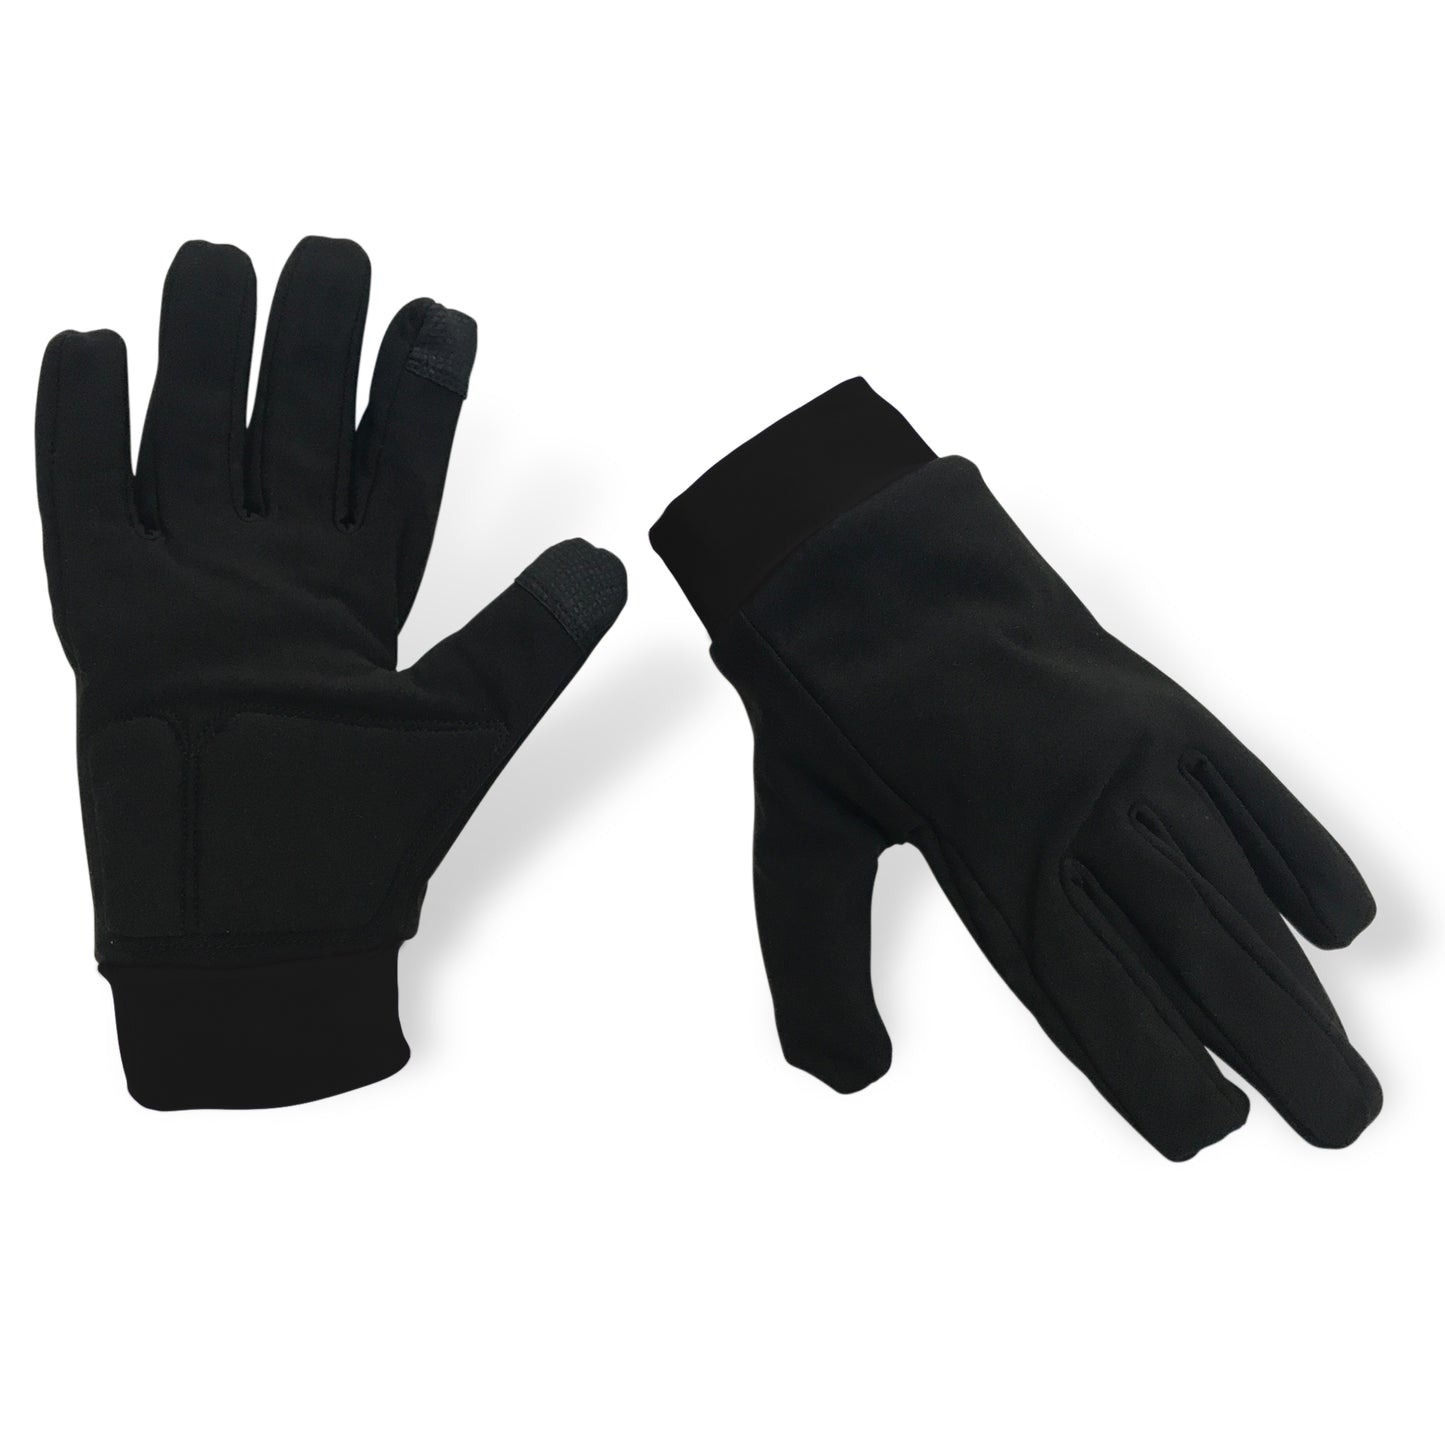 Water-resistant Gloves with Protective Padding, Touchscreen Fingertips, Fleece Lining